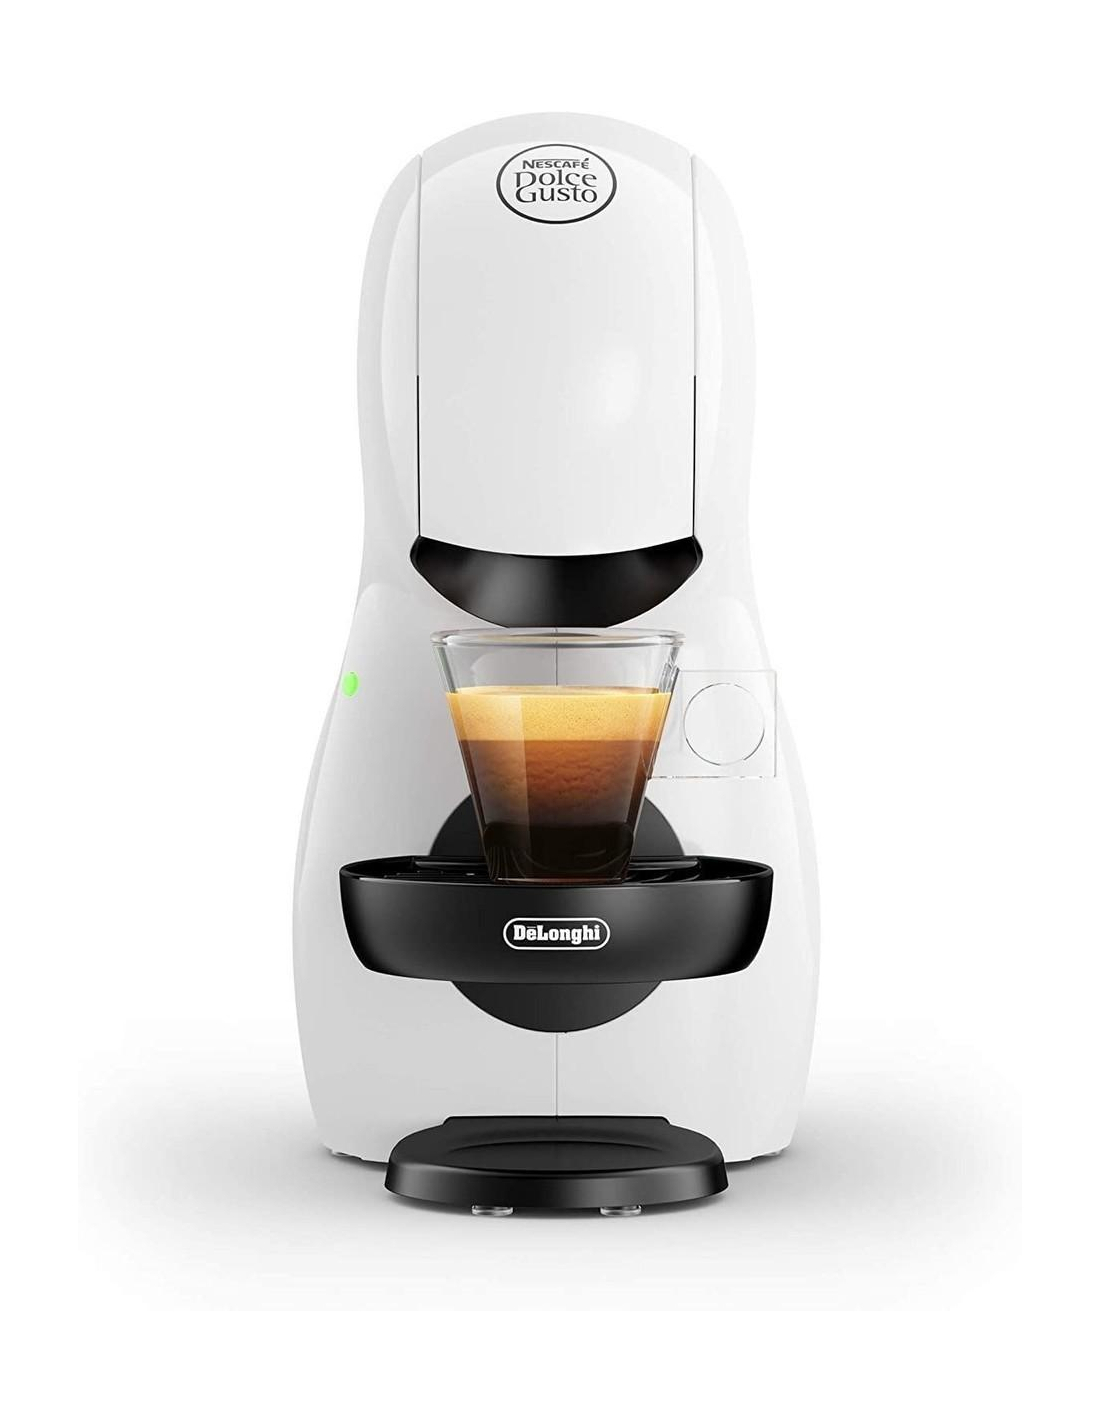 Cafetera Dolce Gusto Piccolo XS blanca EDG110WB